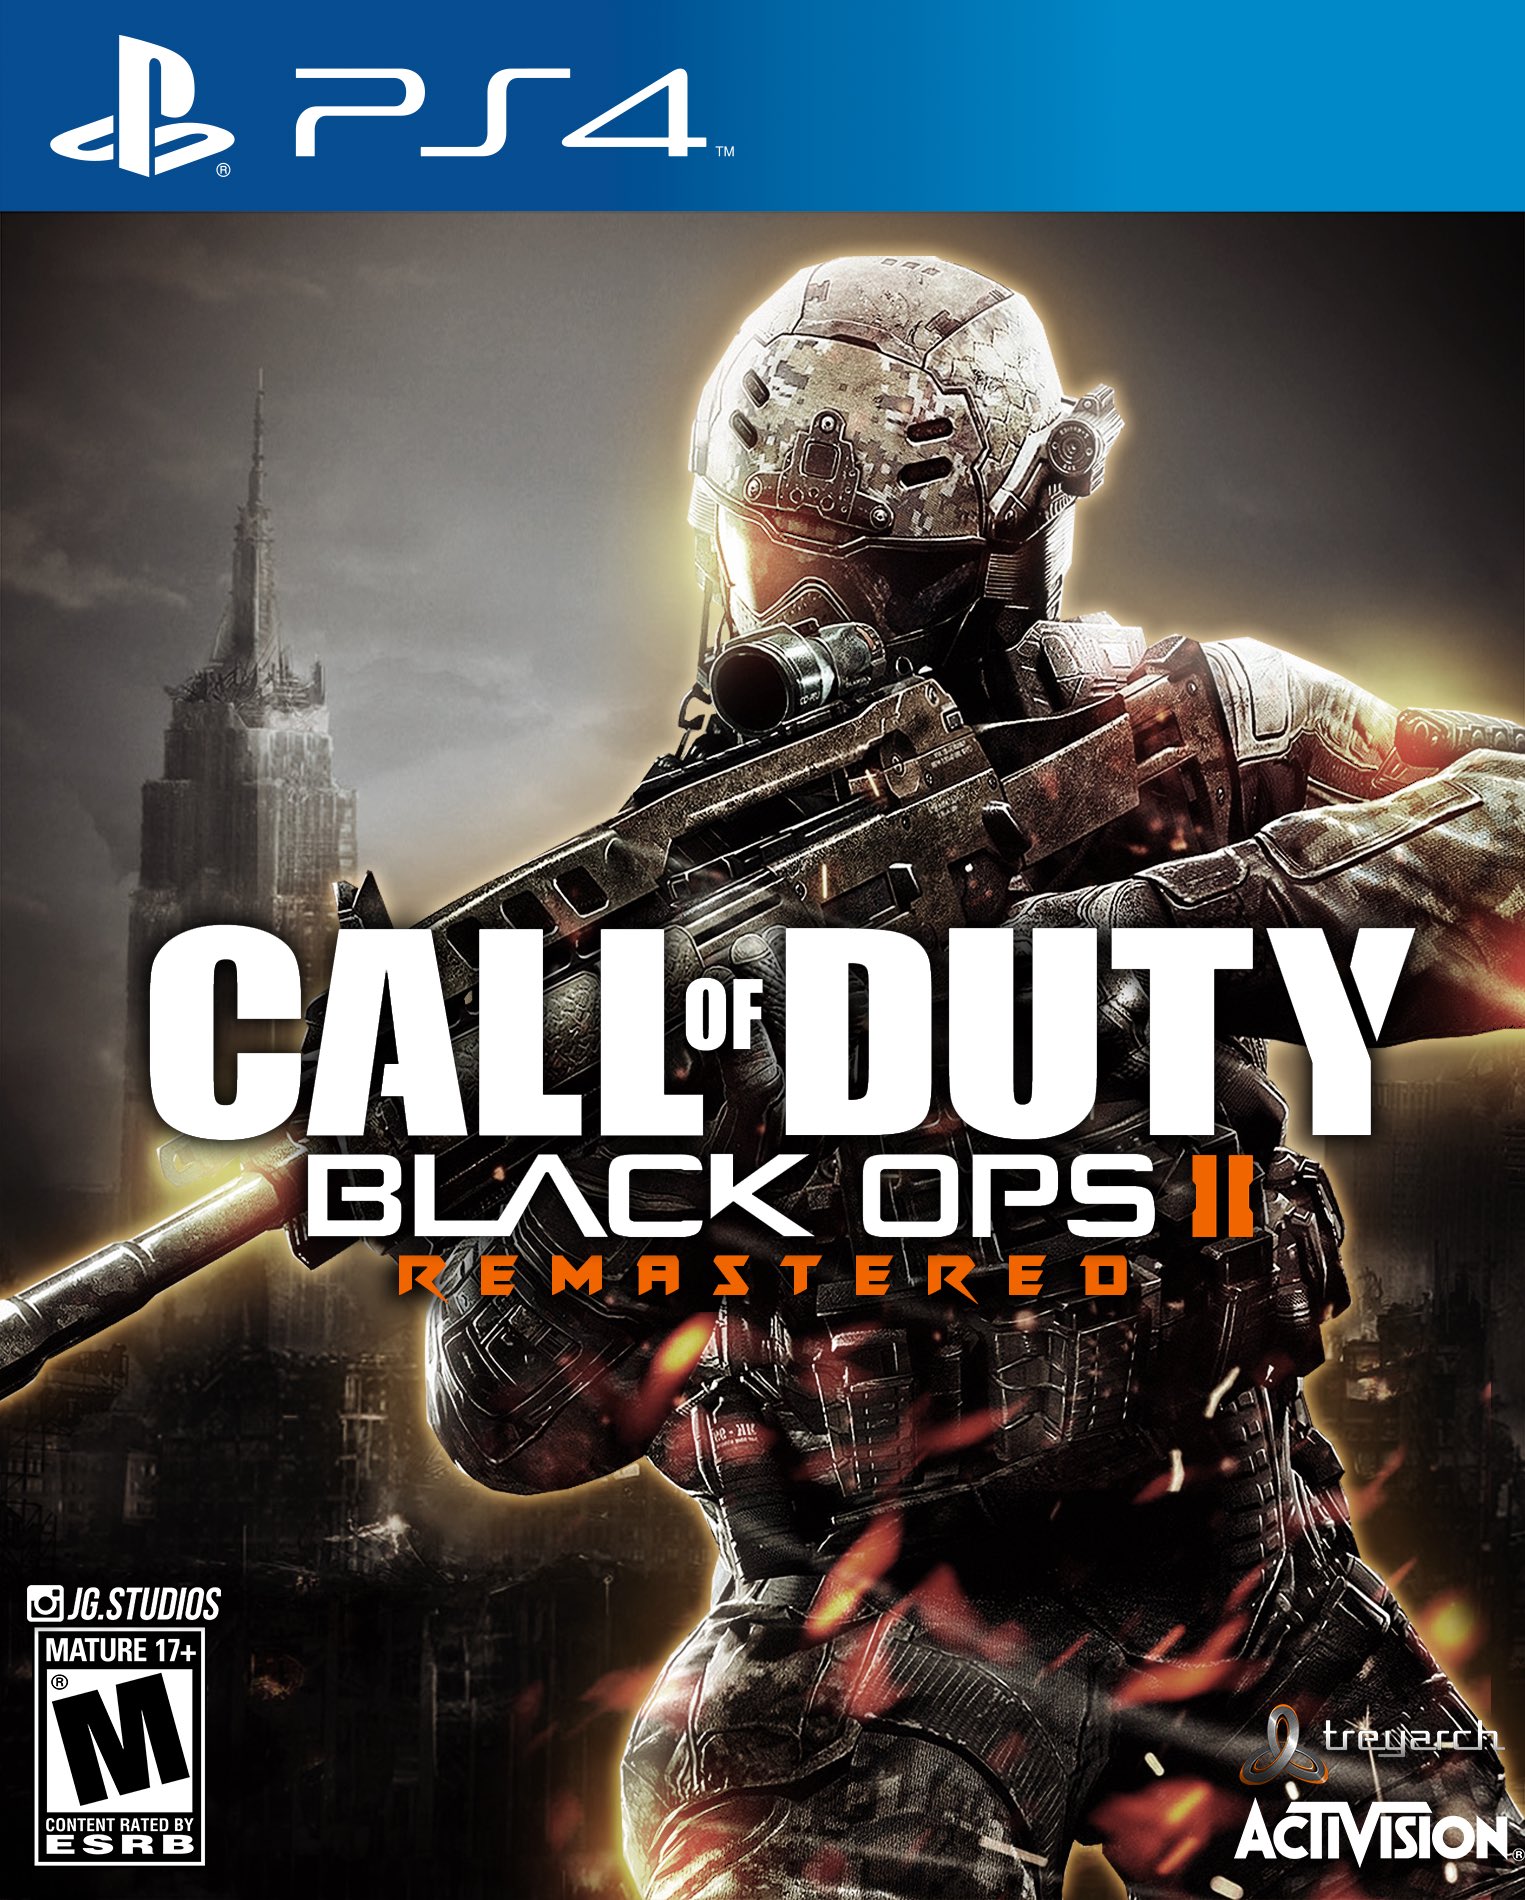 BLACK OPS 2 on PS4? 